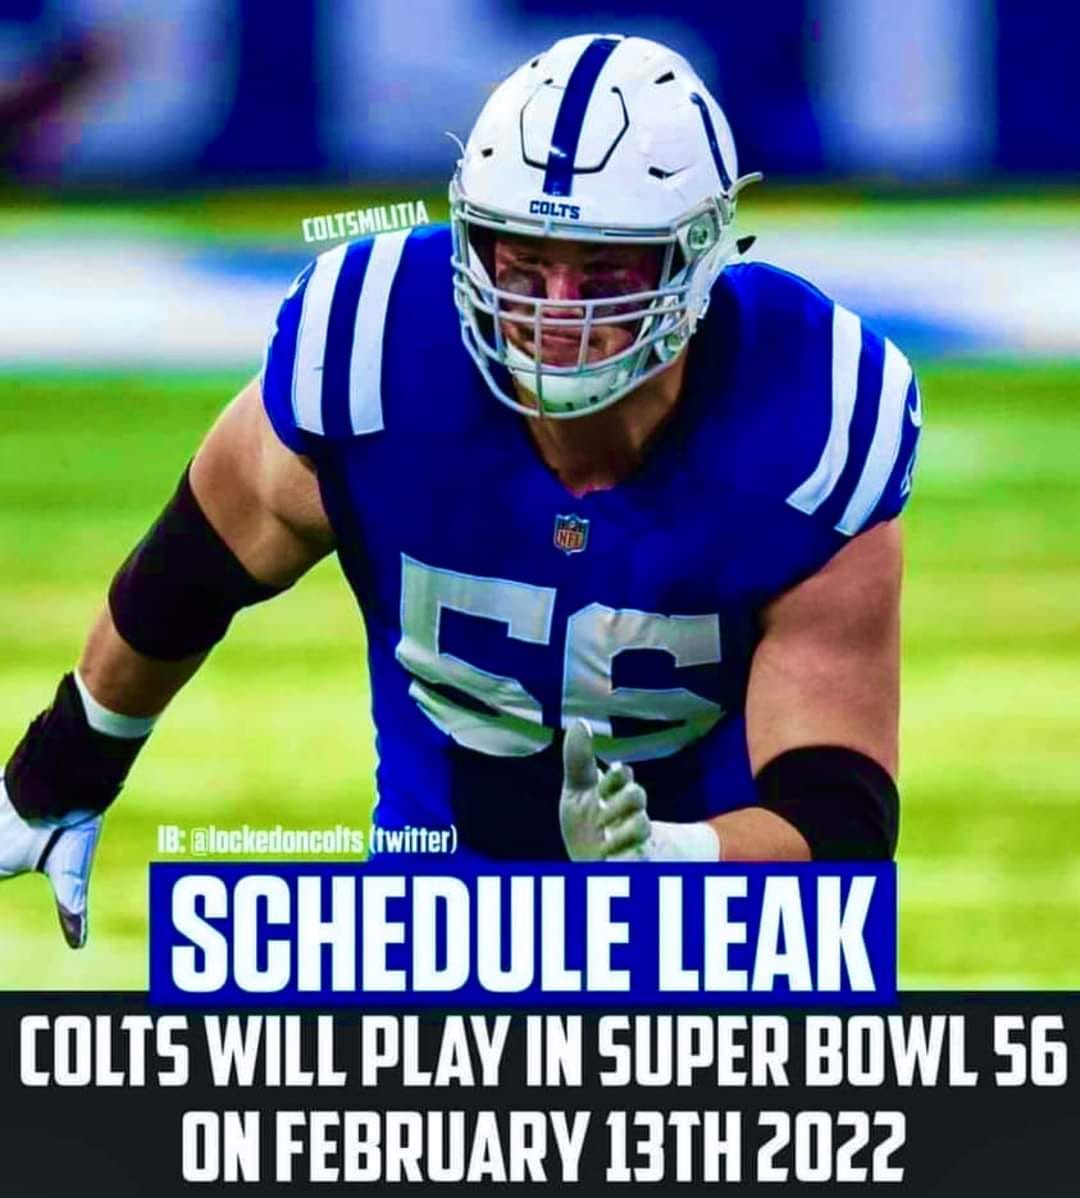 Schedule Leak. Colts will play in Super Bowl 56 on February 13th 2022